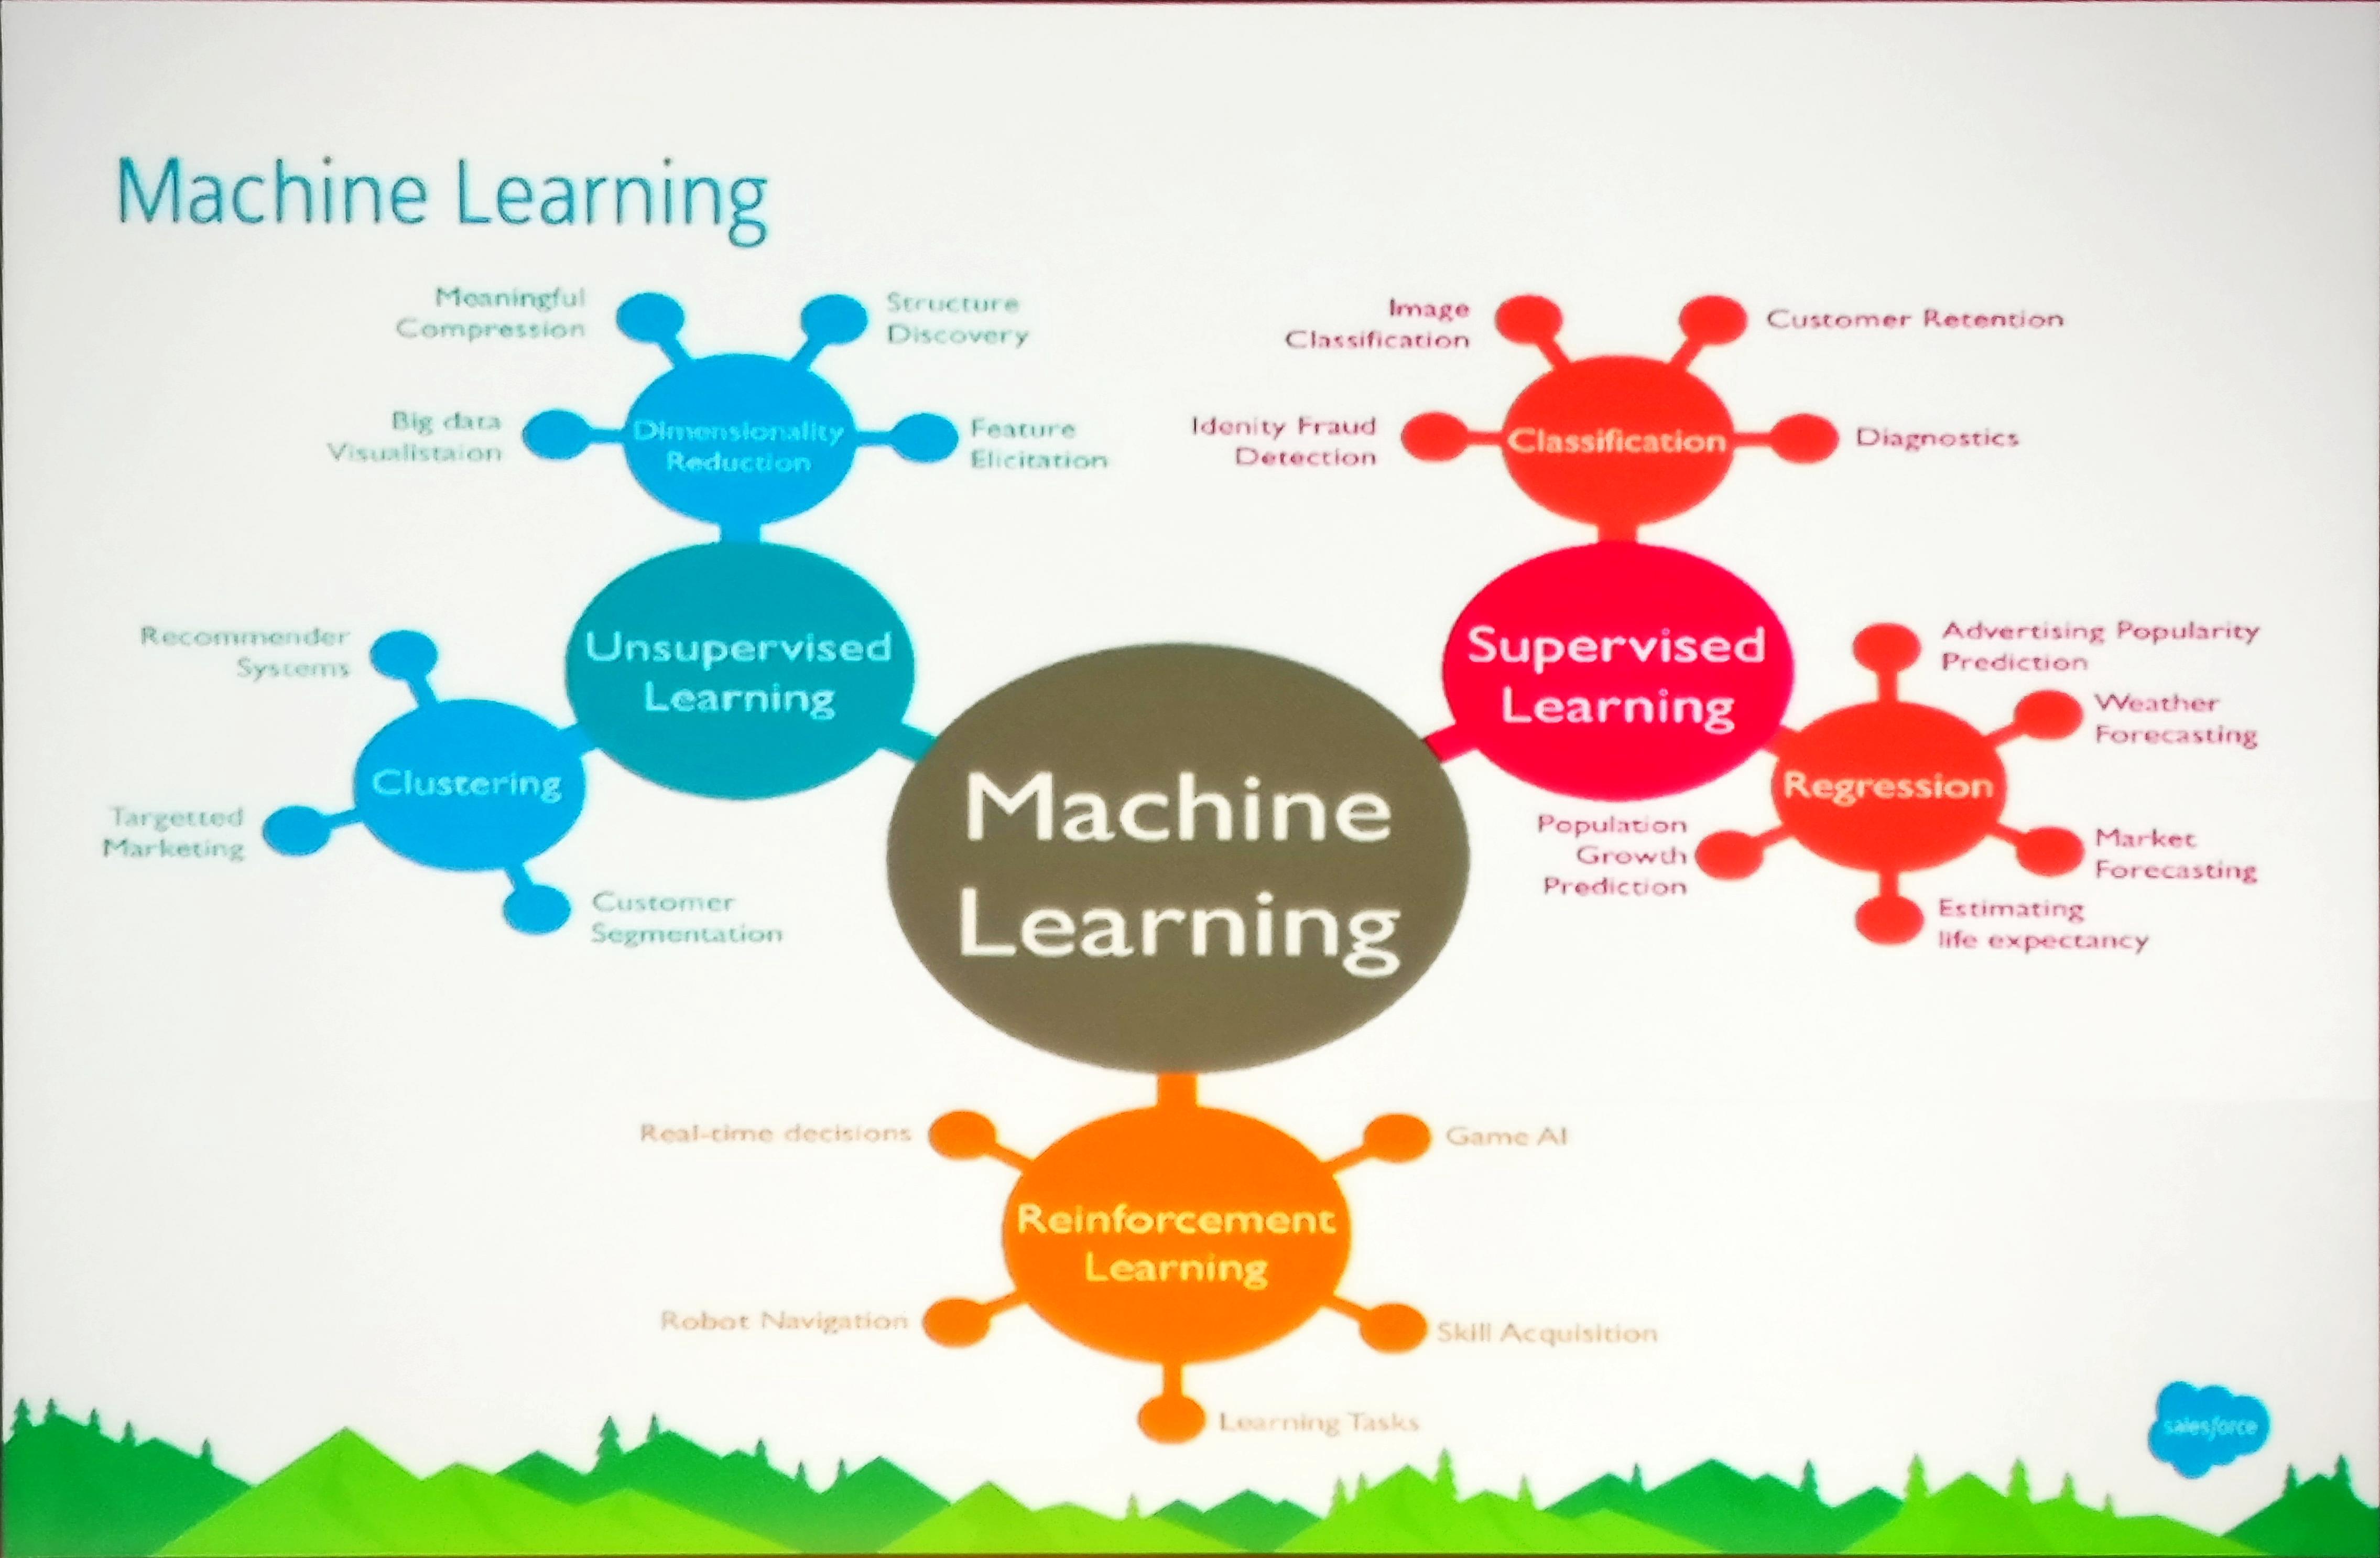 Overview of Machine Learning areas